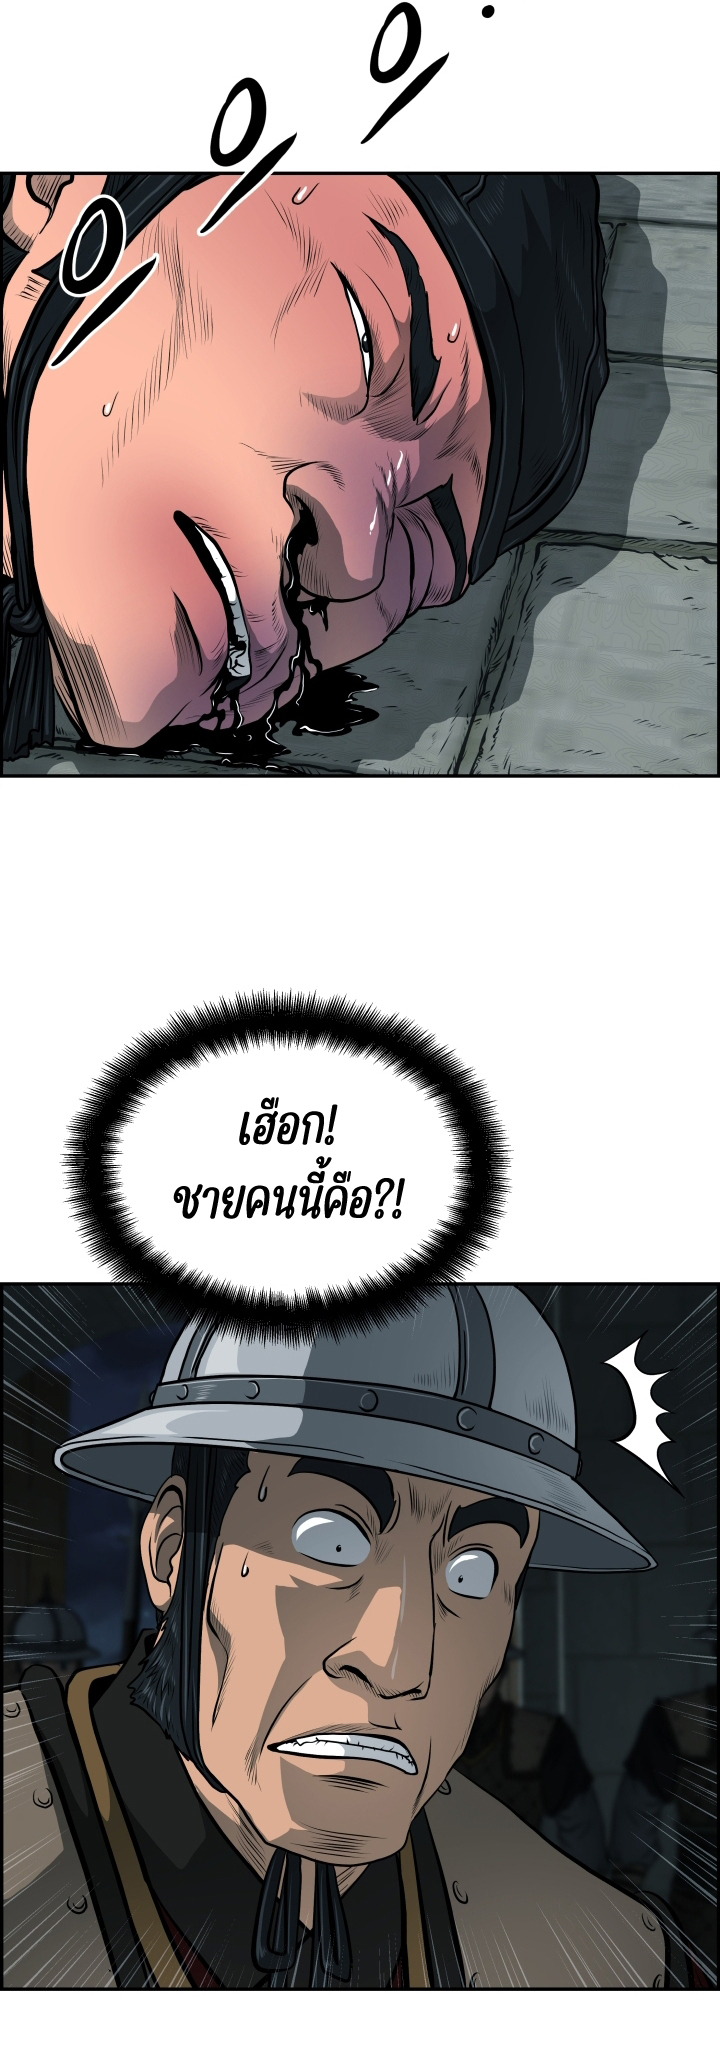 Blade of Wind and Thunder 25 (34)